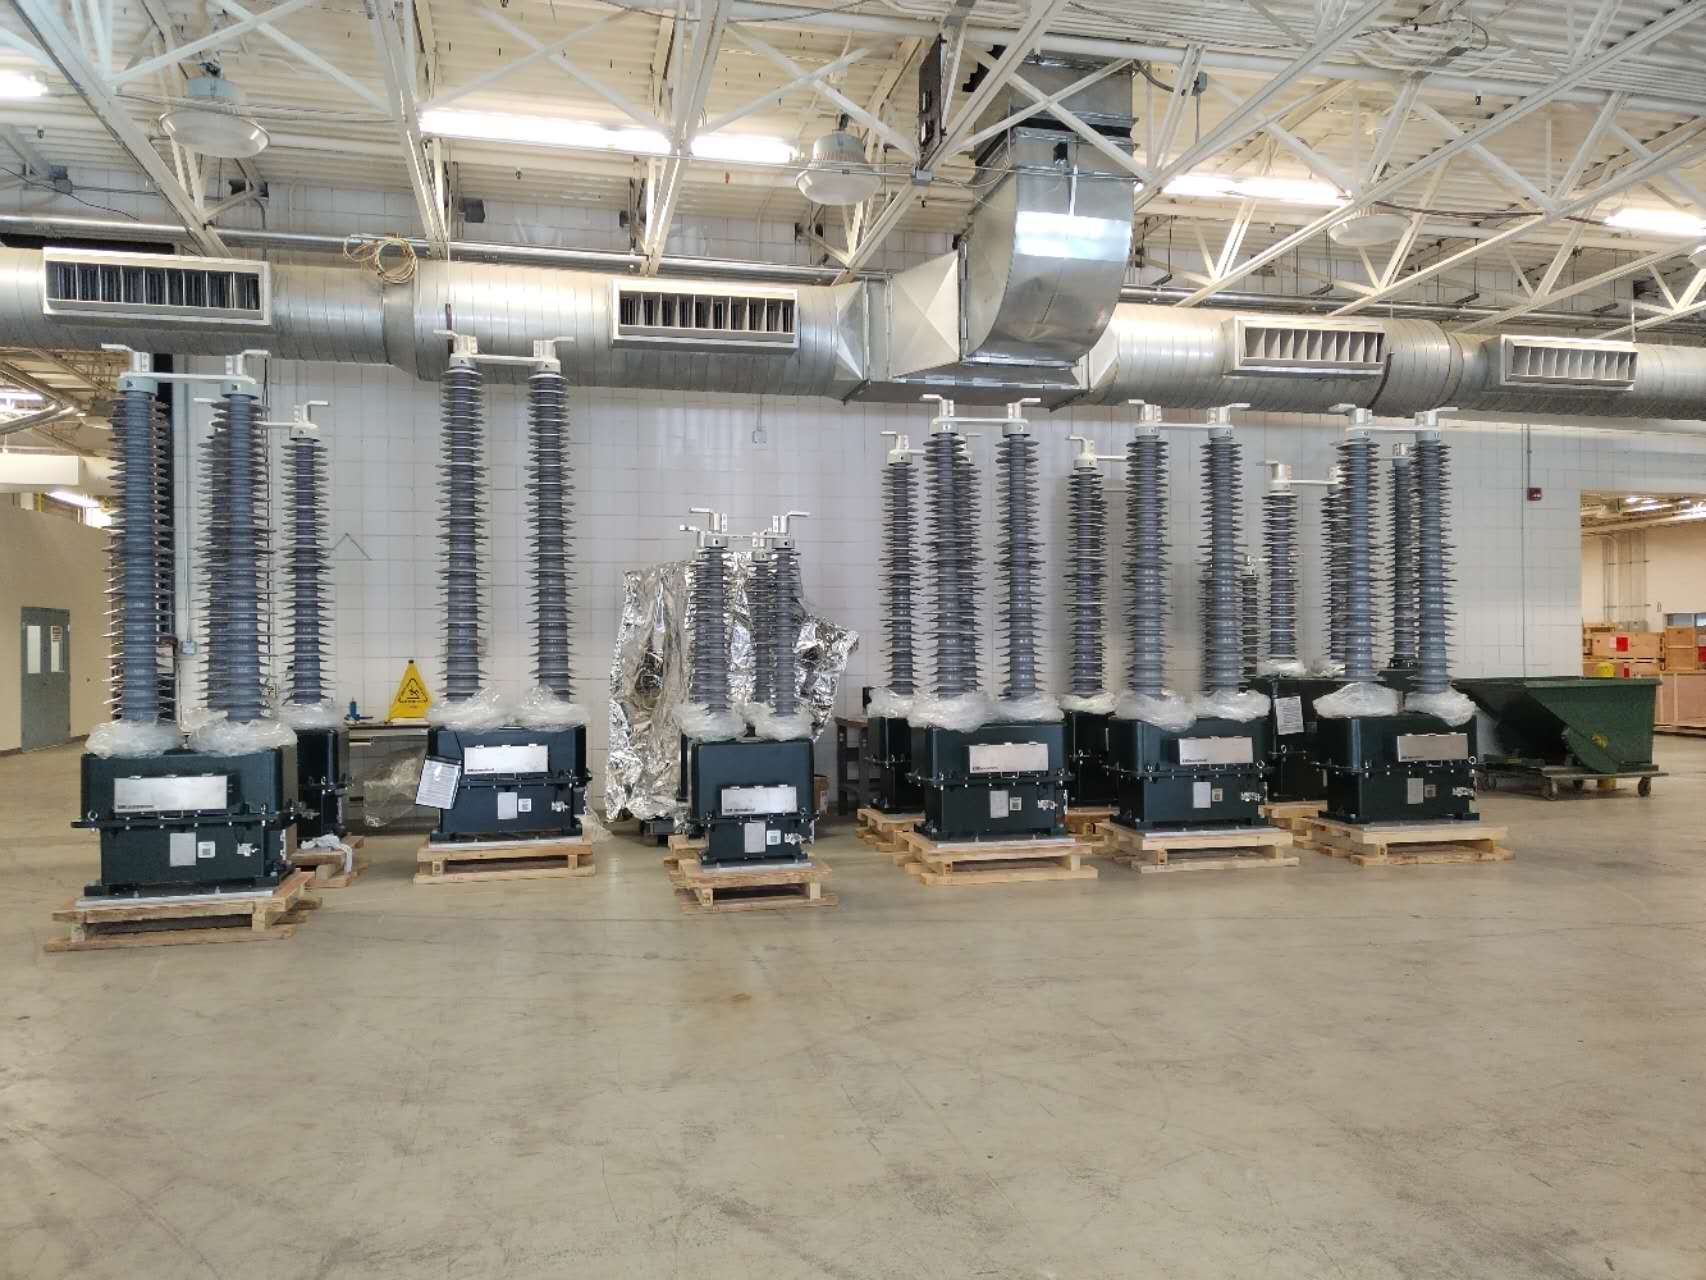 LRGBJ Dry Type Current Transformers Lined Outside the HV Test Lab